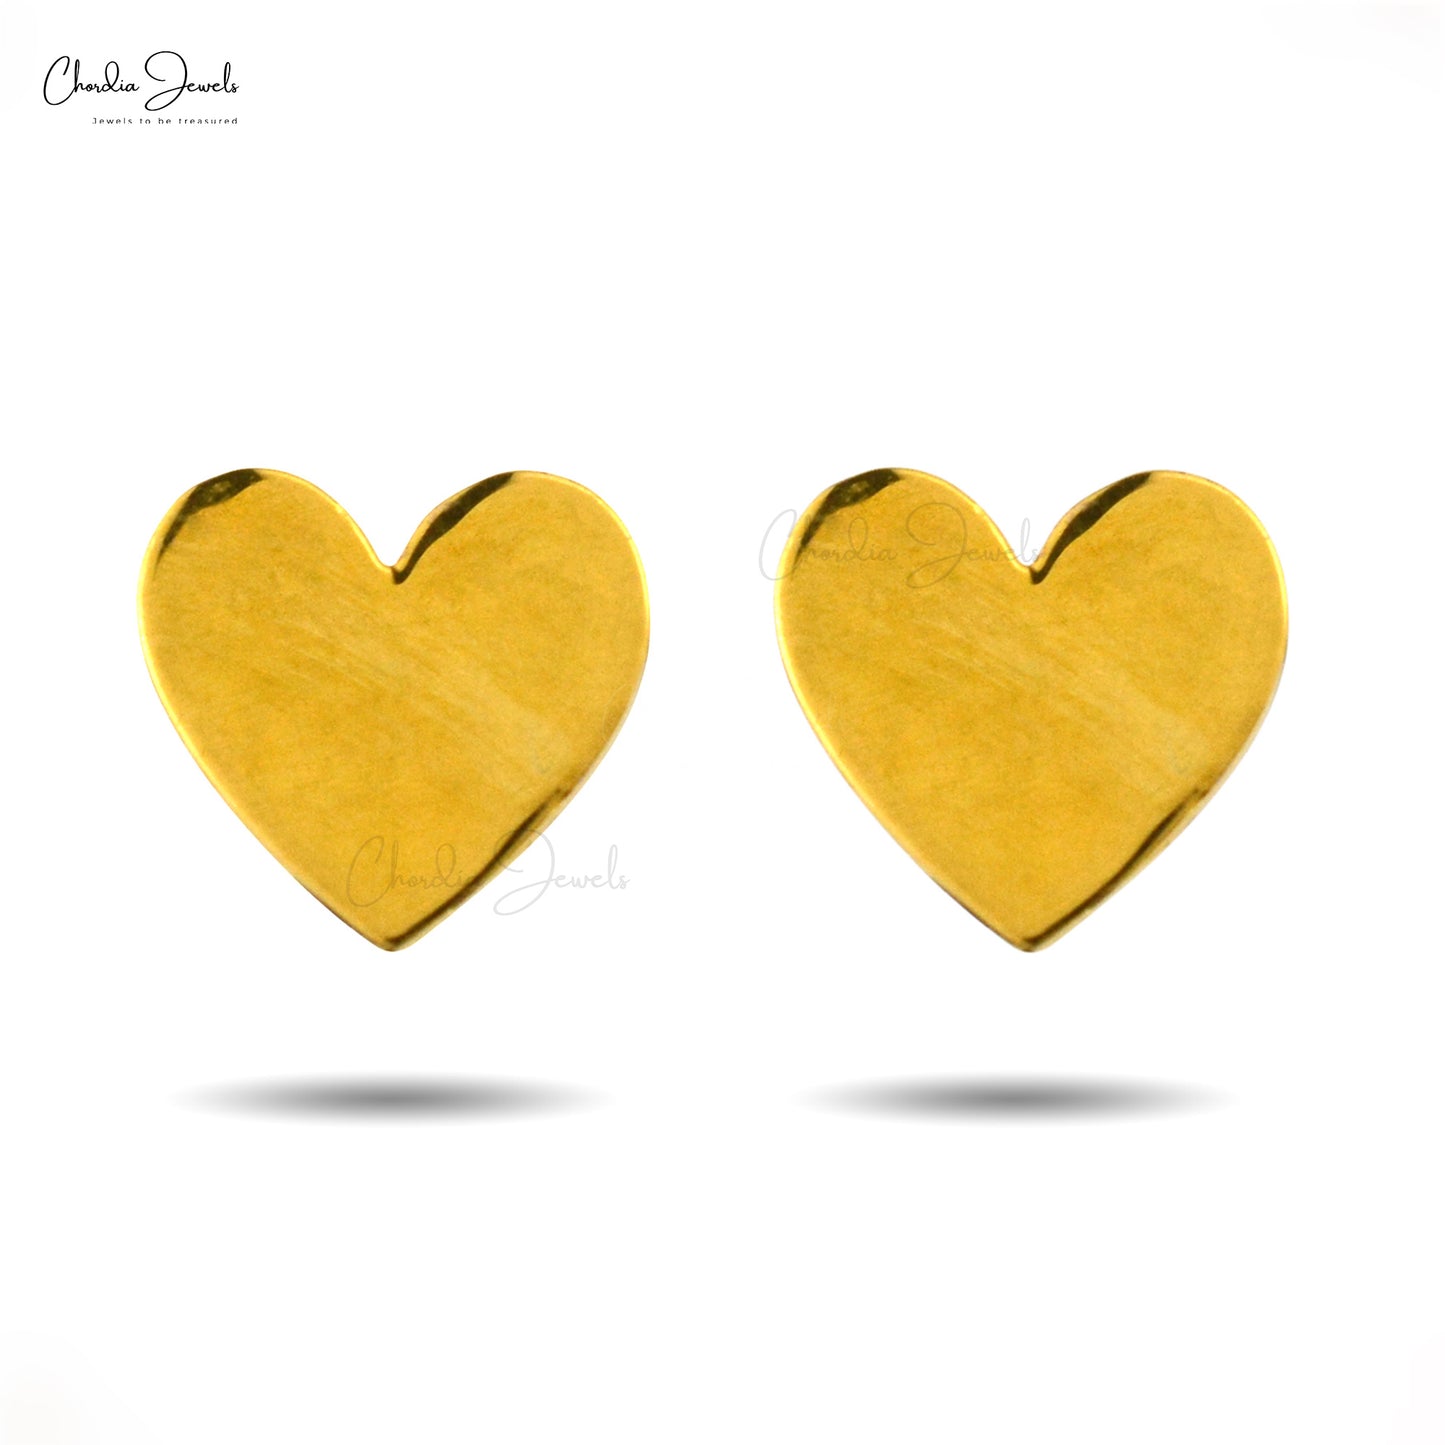 Classic 925 Sterling Silver Jewelry In Plain Yellow Gold Plated Heart Shape Stud Earrings At Discount Price